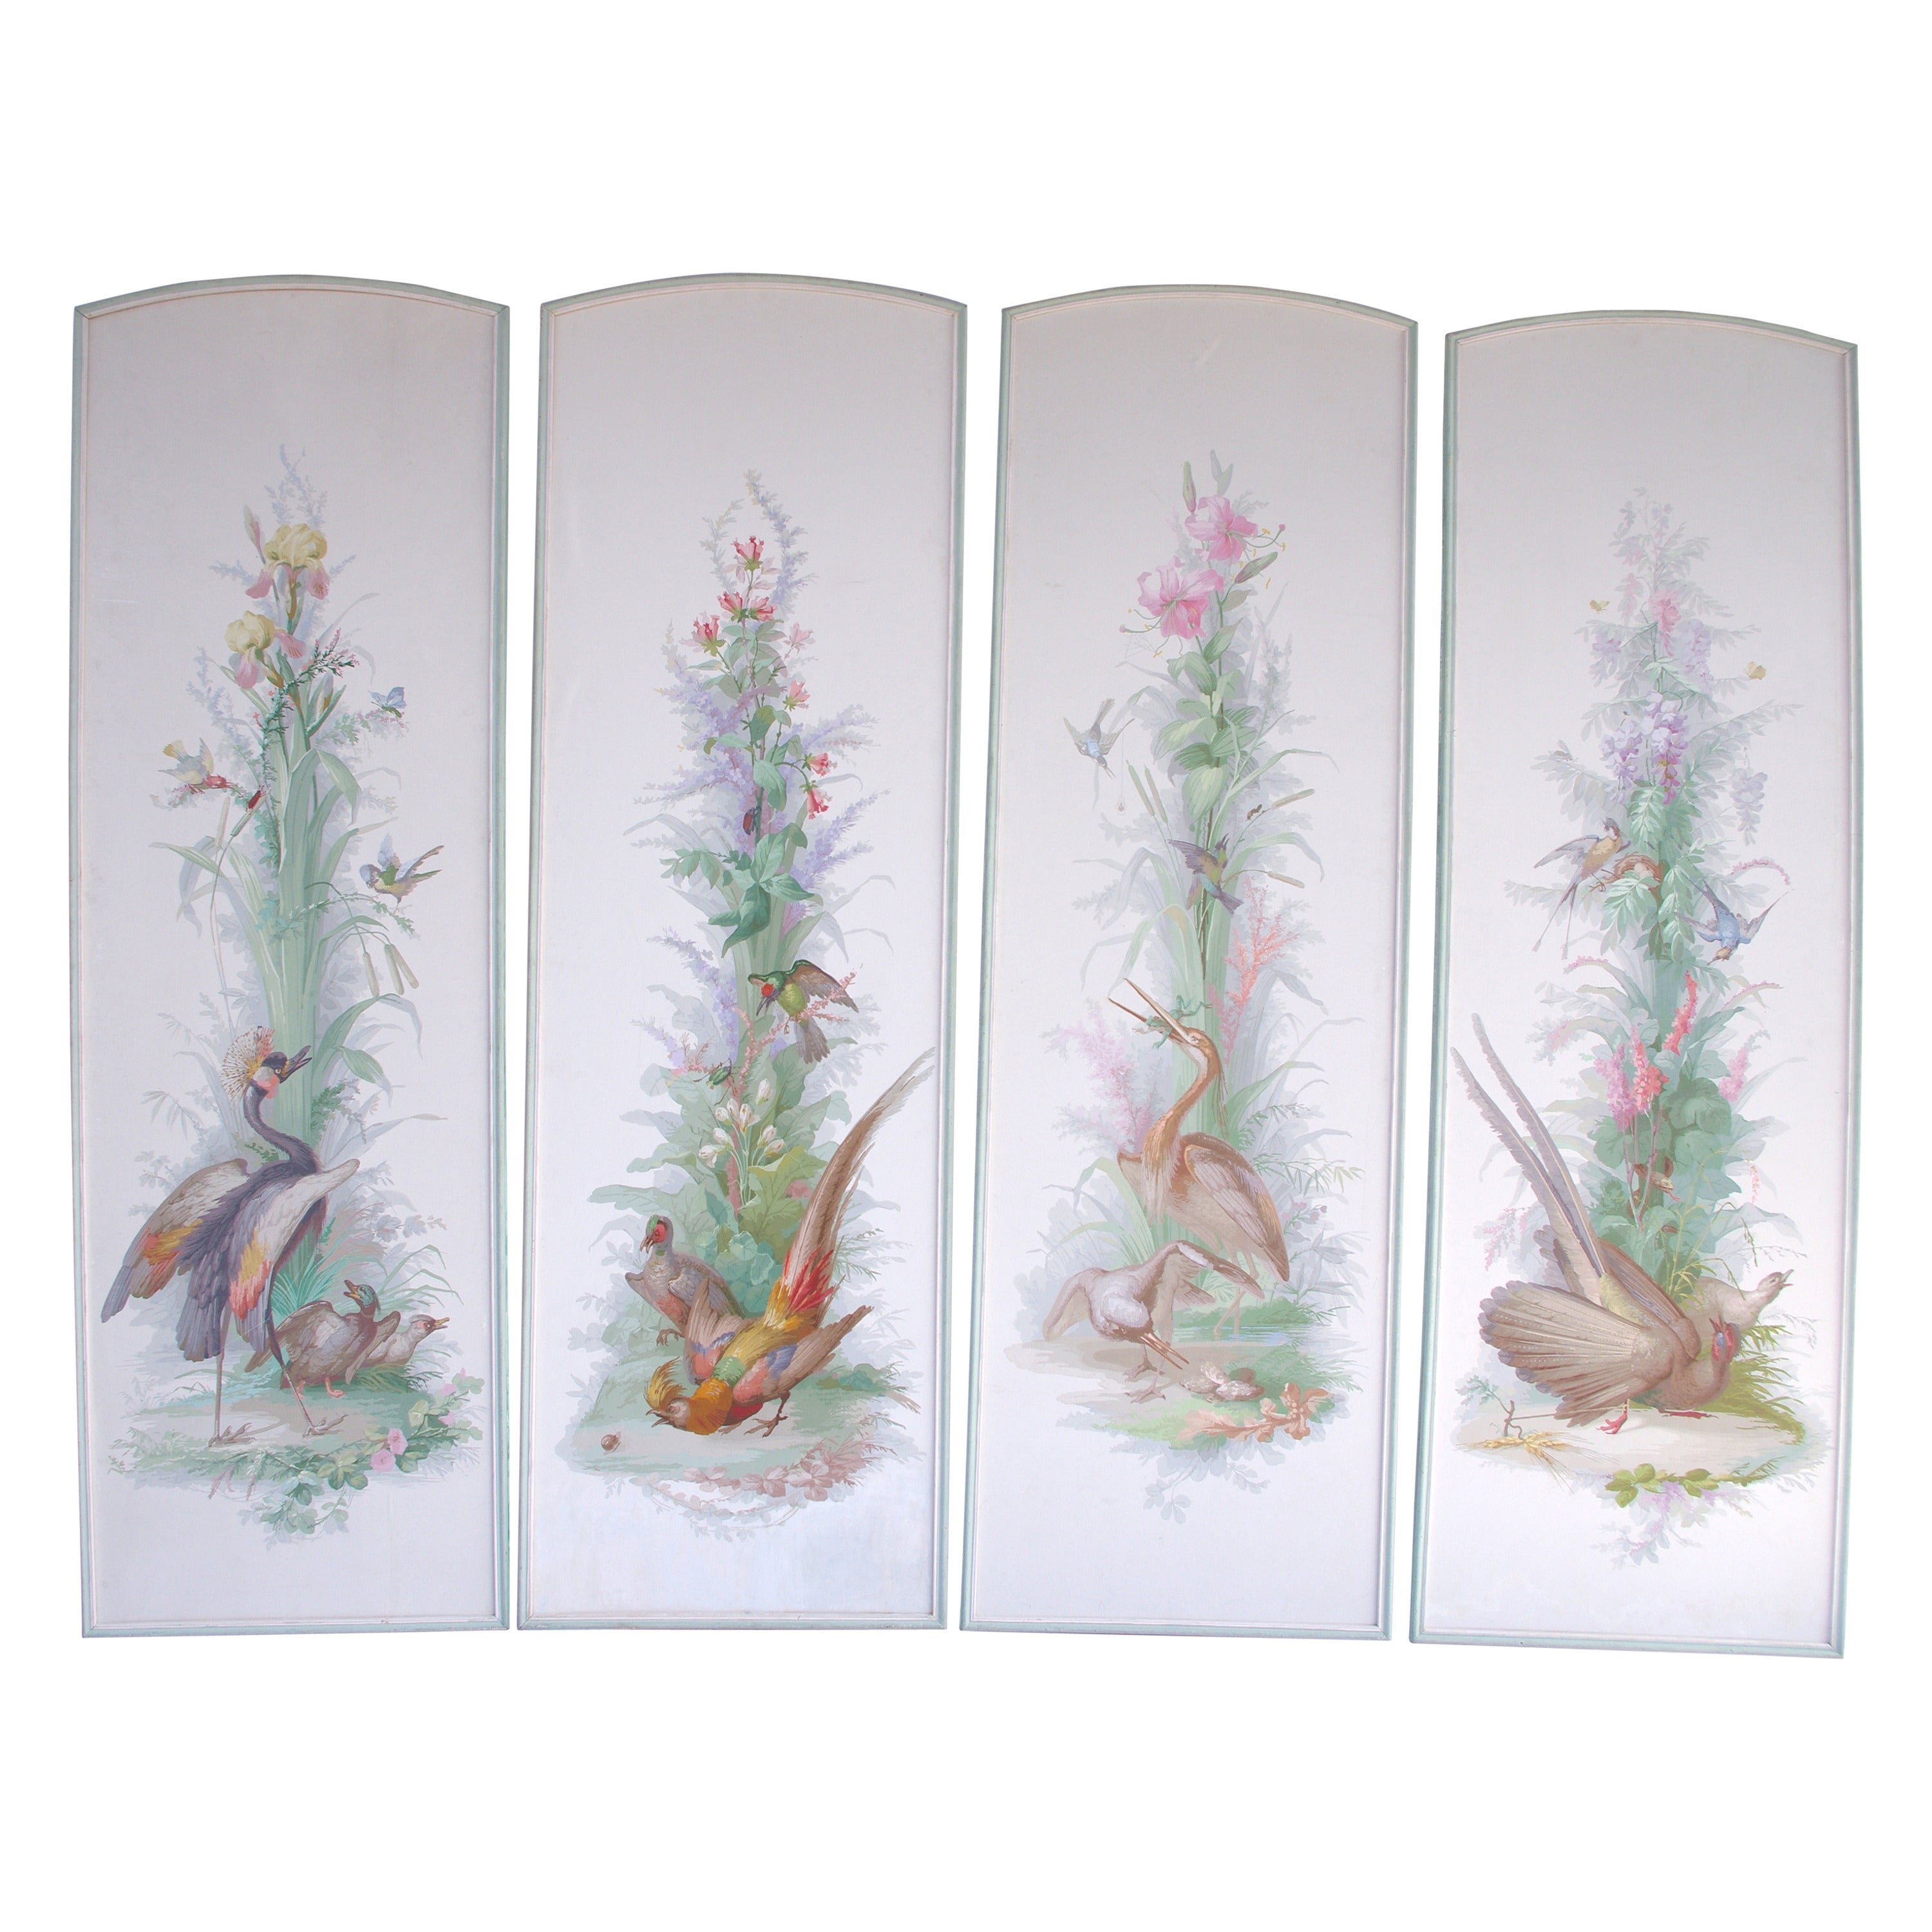 Set of Four Maison Zuber Panels from 1950